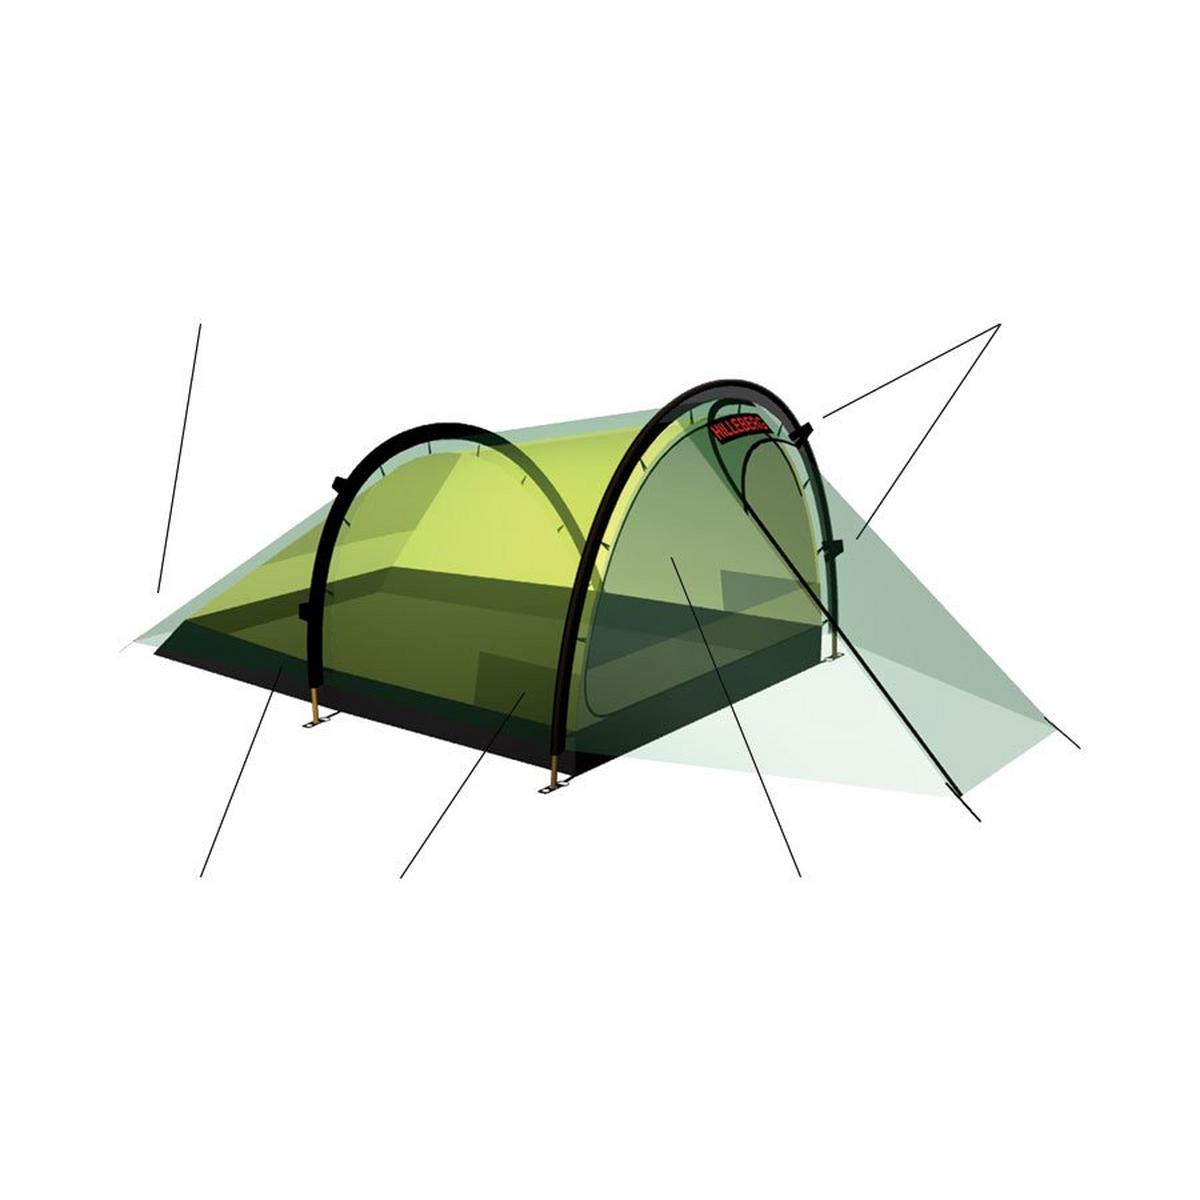 Hilleberg Anjan 2 | Two Person Tent